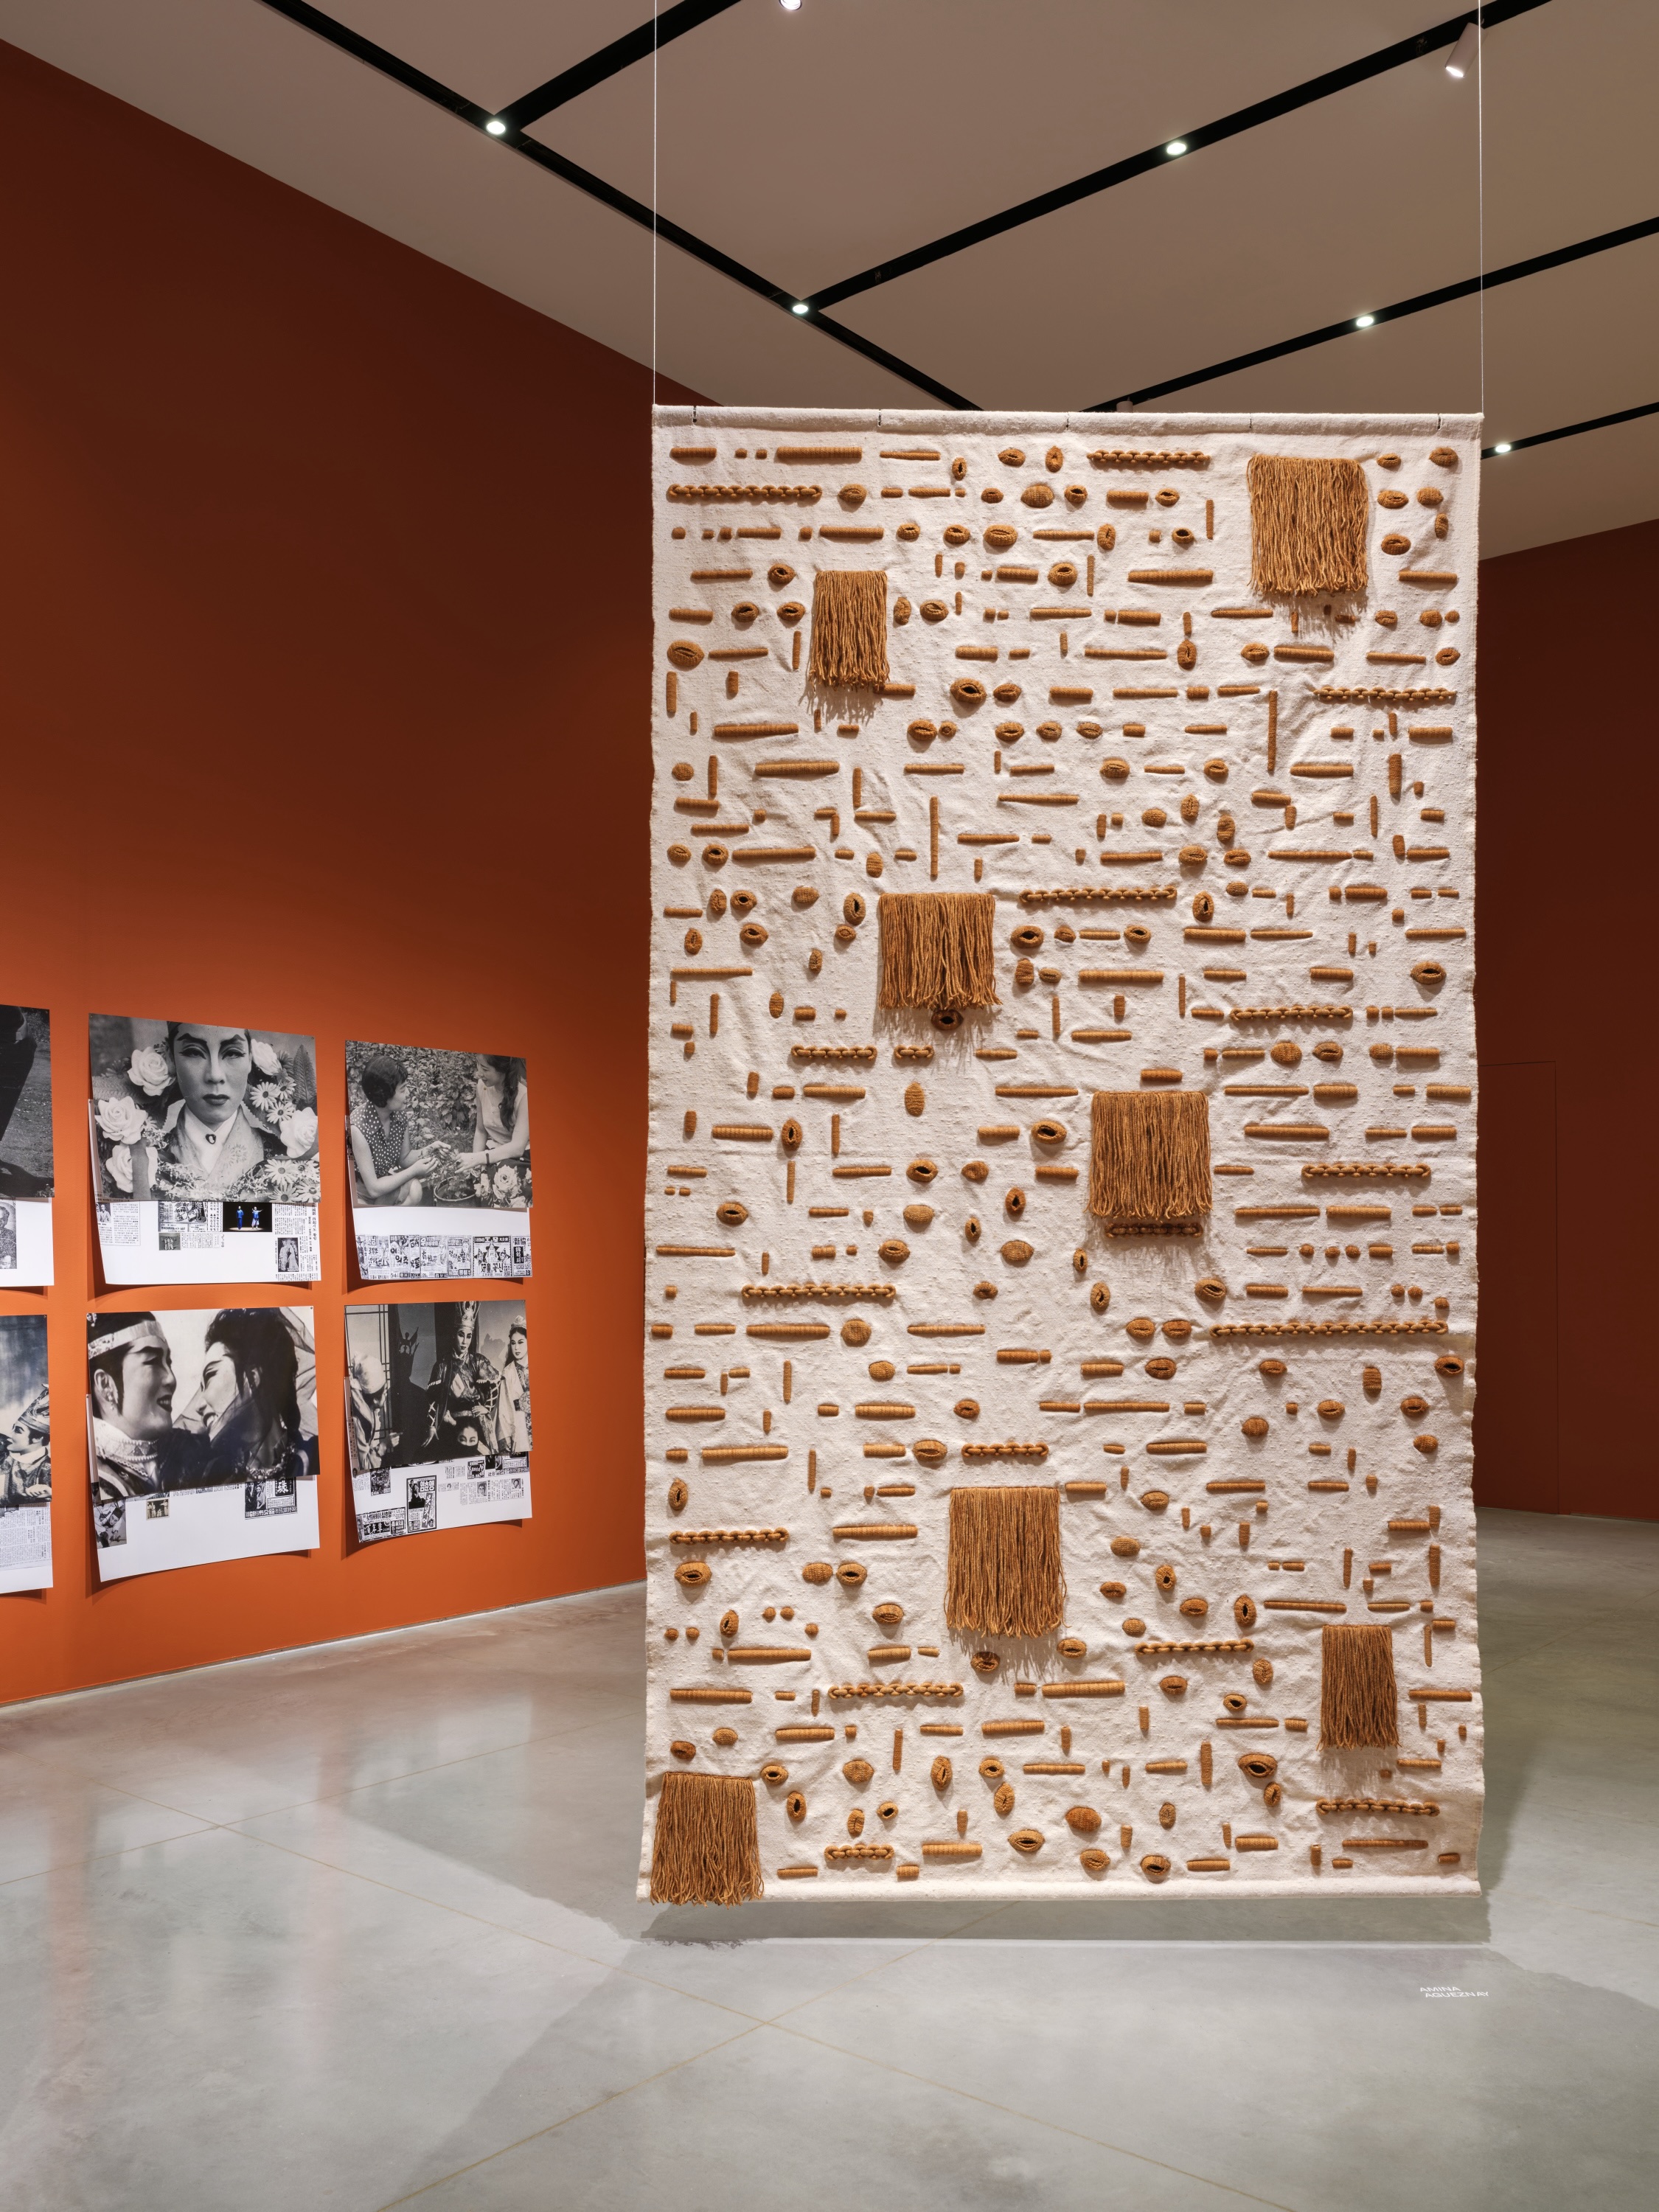 Gallery interior with terracotta-red walls and a gray floor. On the left wall is a photo collage installed in a grid featuring historical photographs of East Asian stage performers and Korean newspaper cuttings. Suspended from the ceiling in the middle of the gallery floor is a sand-colored tapestry with brown geometric details.